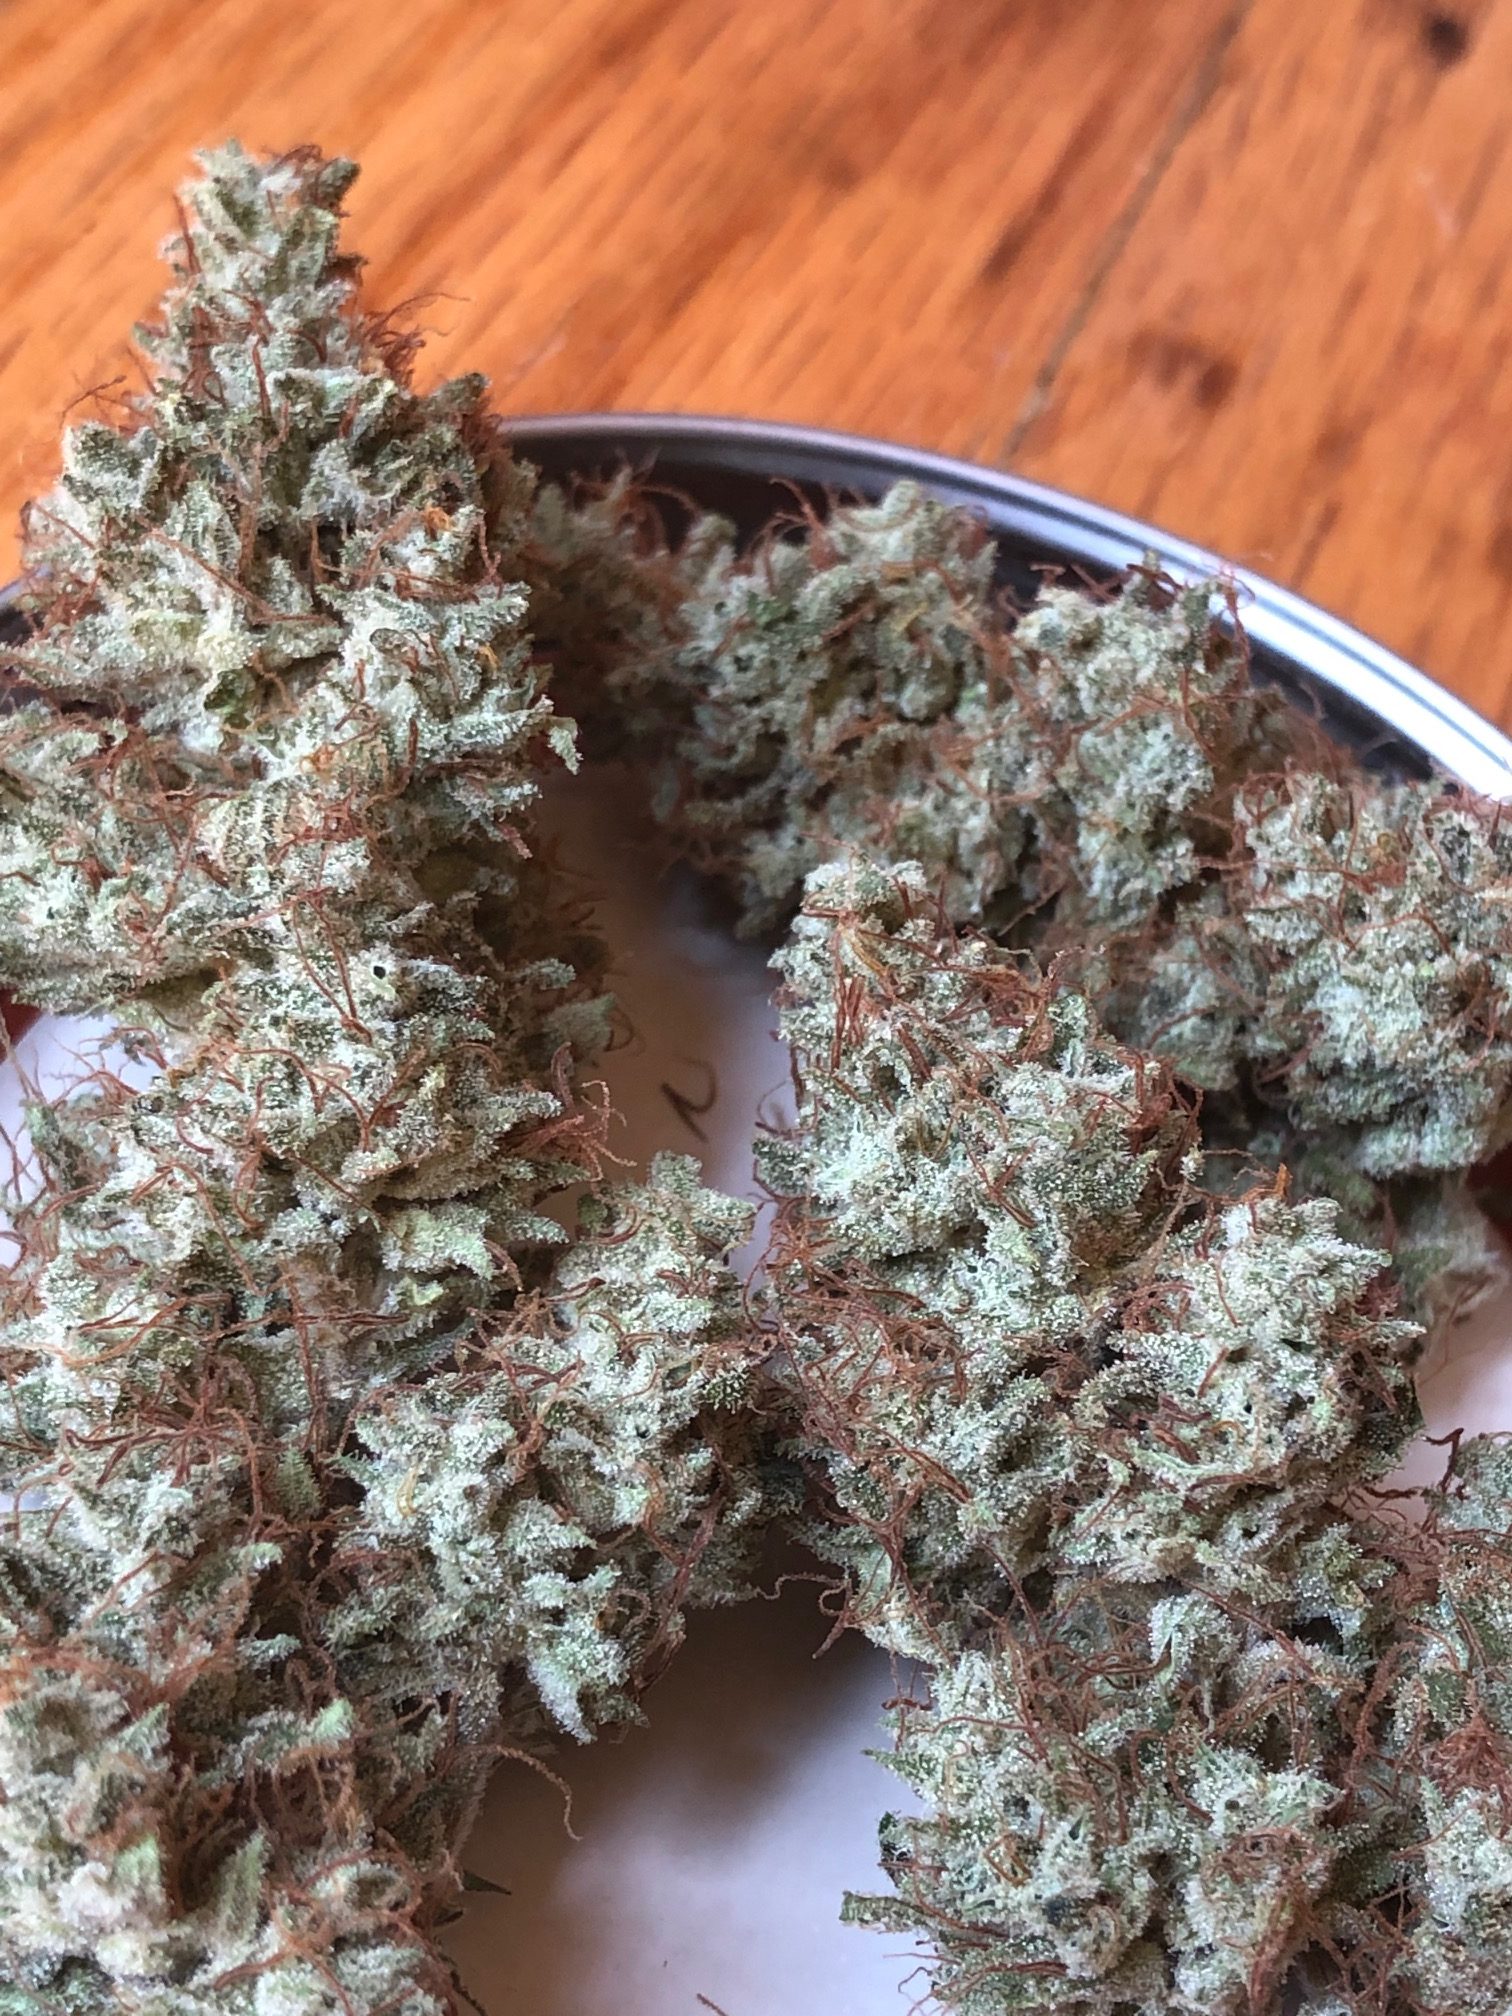 cured cannabis flowers